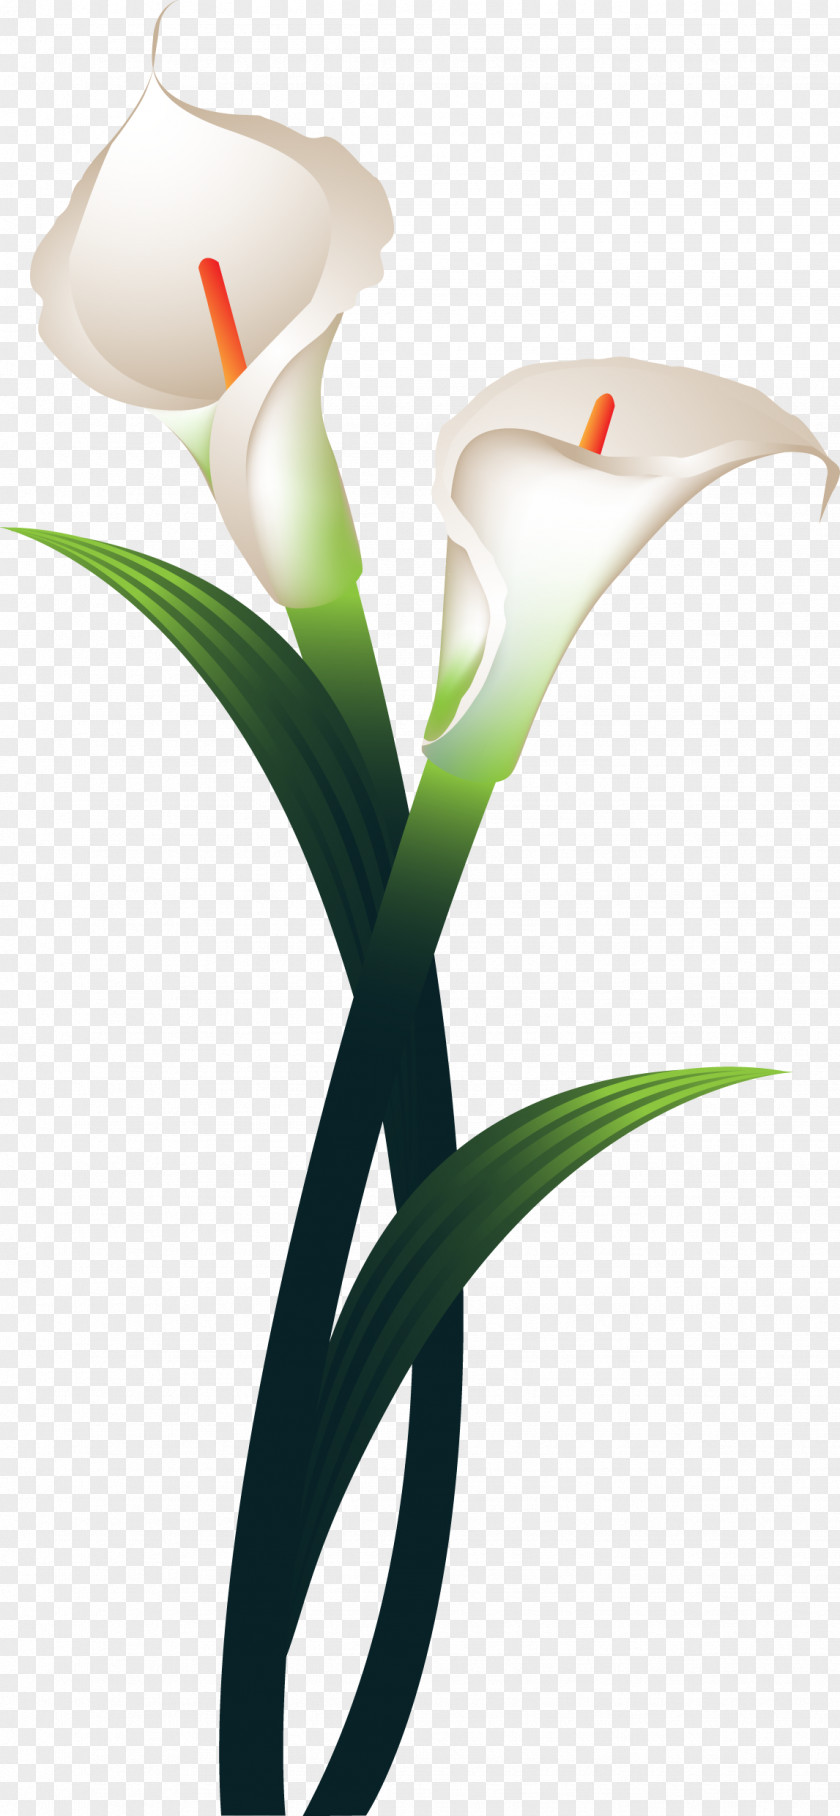 Callalily Flower Daffodil Plant Stem PNG